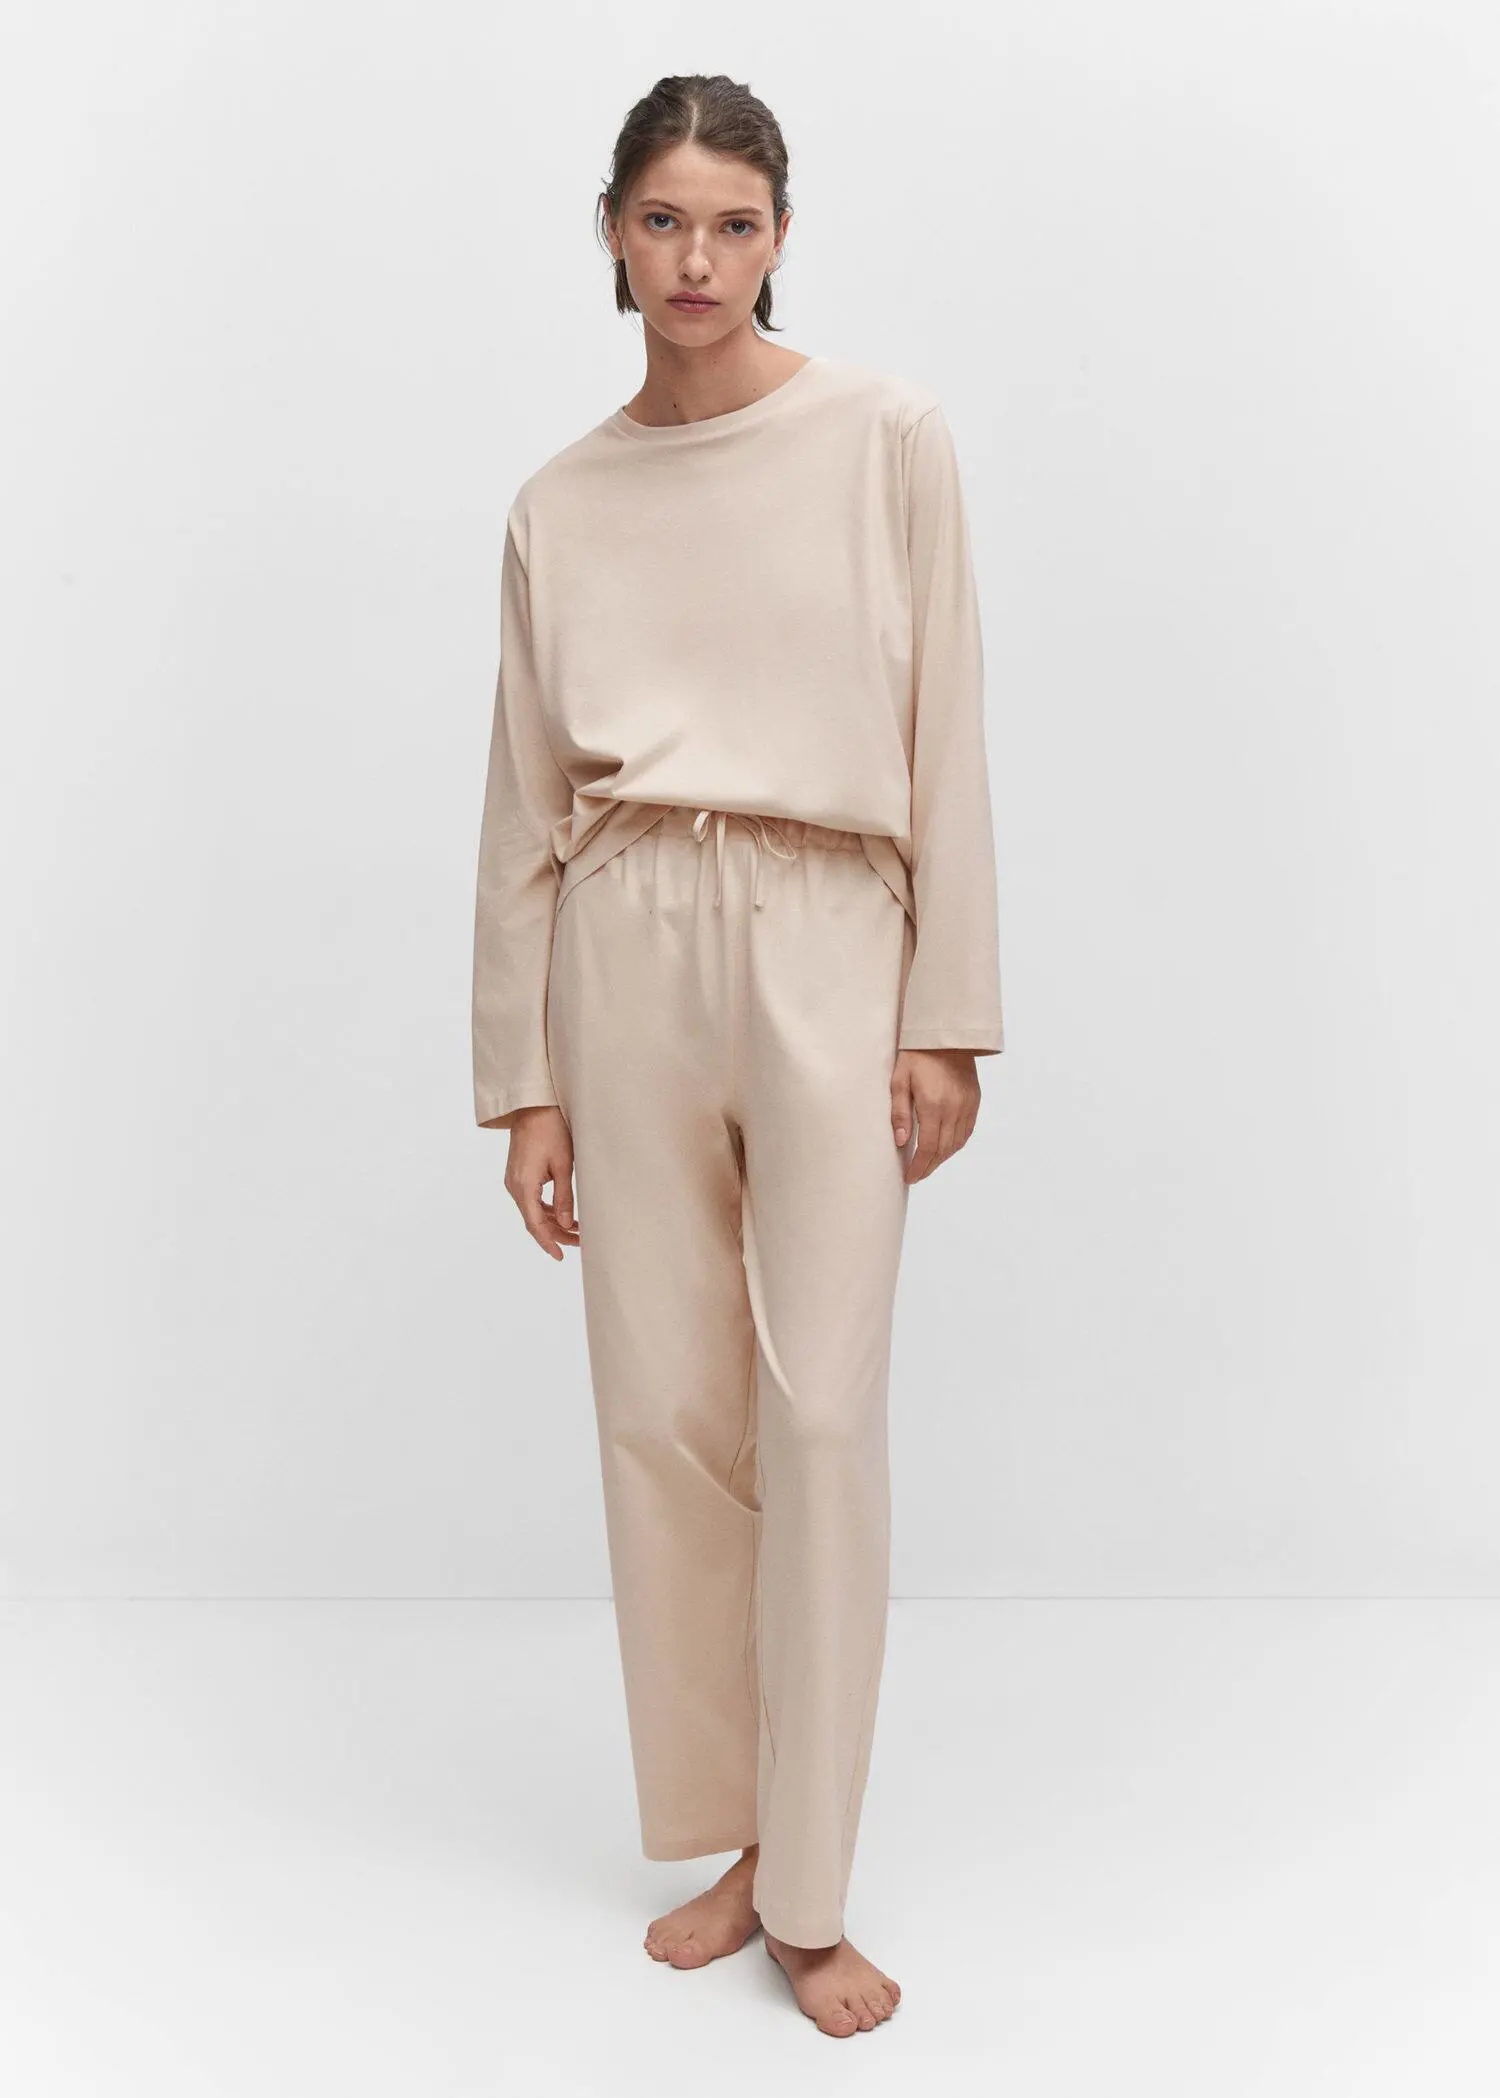 Mango Cotton long pyjamas. a person standing in a room wearing a beige outfit. 